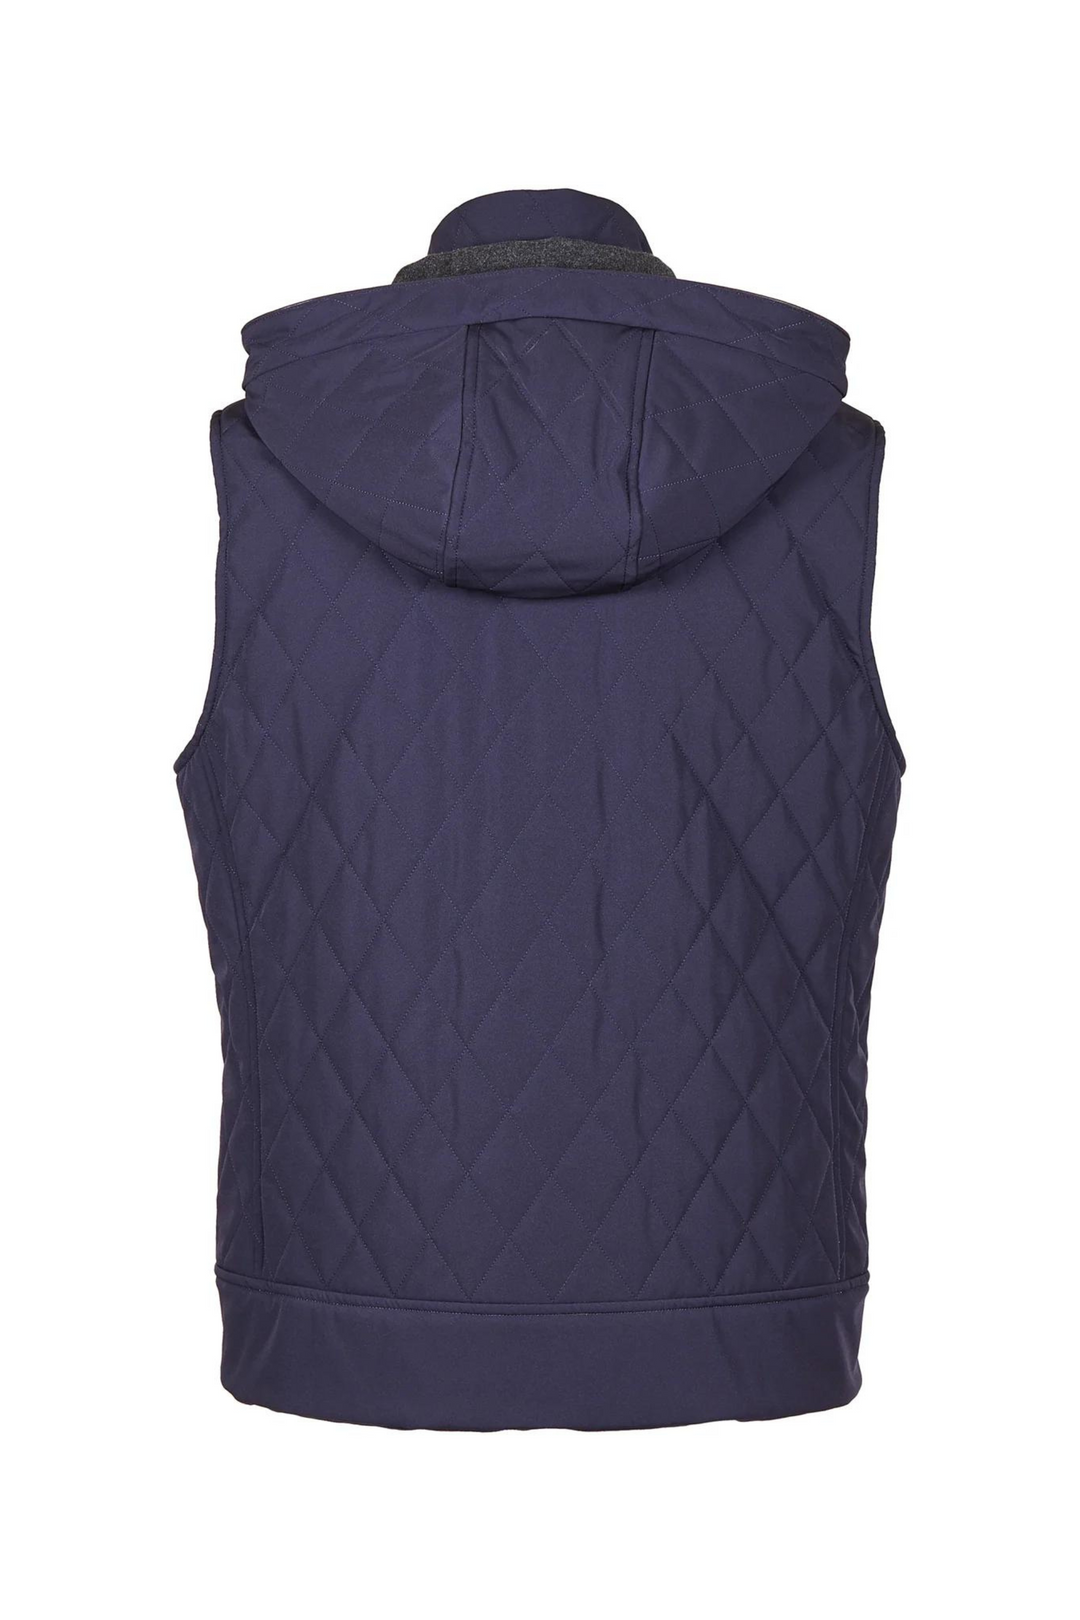 Luciano Barbera Navy Quilted Vest